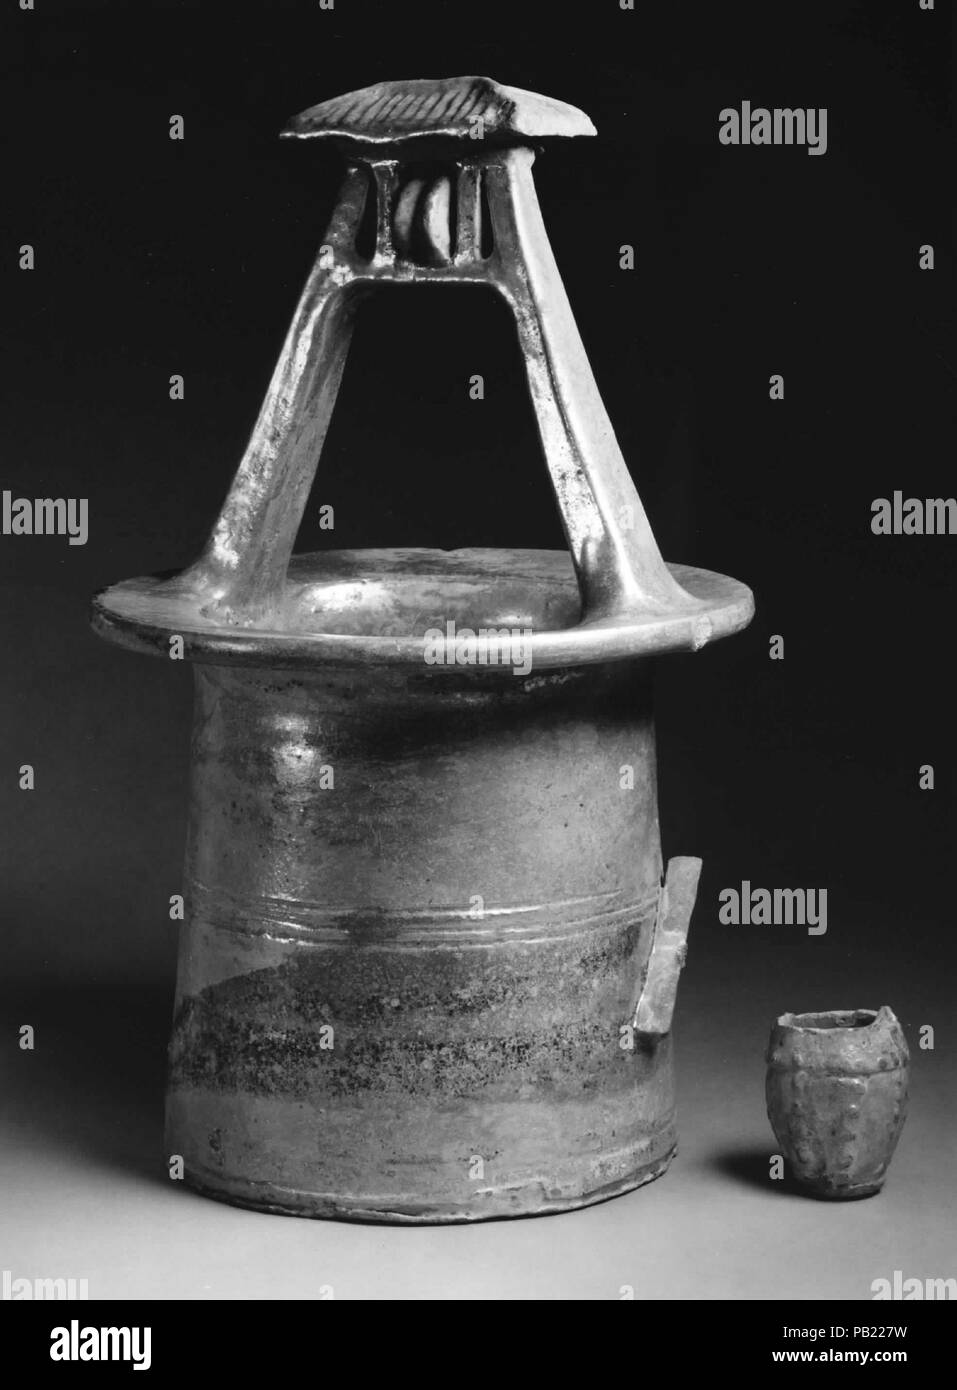 Model of Wellhead with Bucket. Culture: China. Dimensions: H. 14 7/8 in. (37.8 cm); W. 8 3/4 in. (22.2 cm). Museum: Metropolitan Museum of Art, New York, USA. Stock Photo